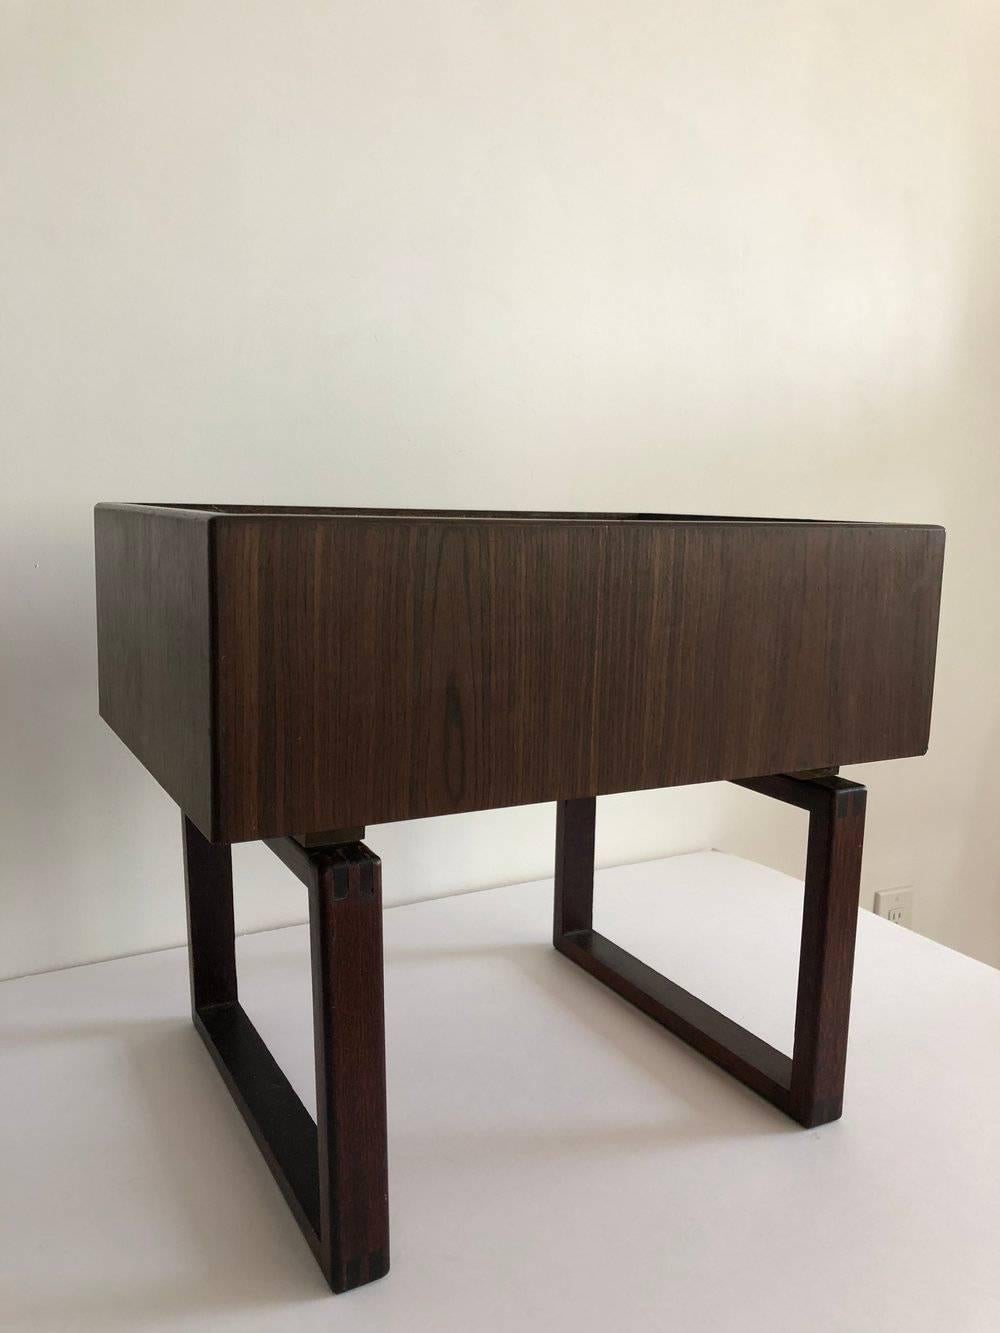 1960s Danish Kai Kristiansen for Salin Mobler rosewood planter. Super rare and awesome! Plants not included. Has a removable steel planter tray. Stunning piece. Great condition. Pretty leg joinery. 

Measure: 20” wide x 13.75” x deep x 17” tall.